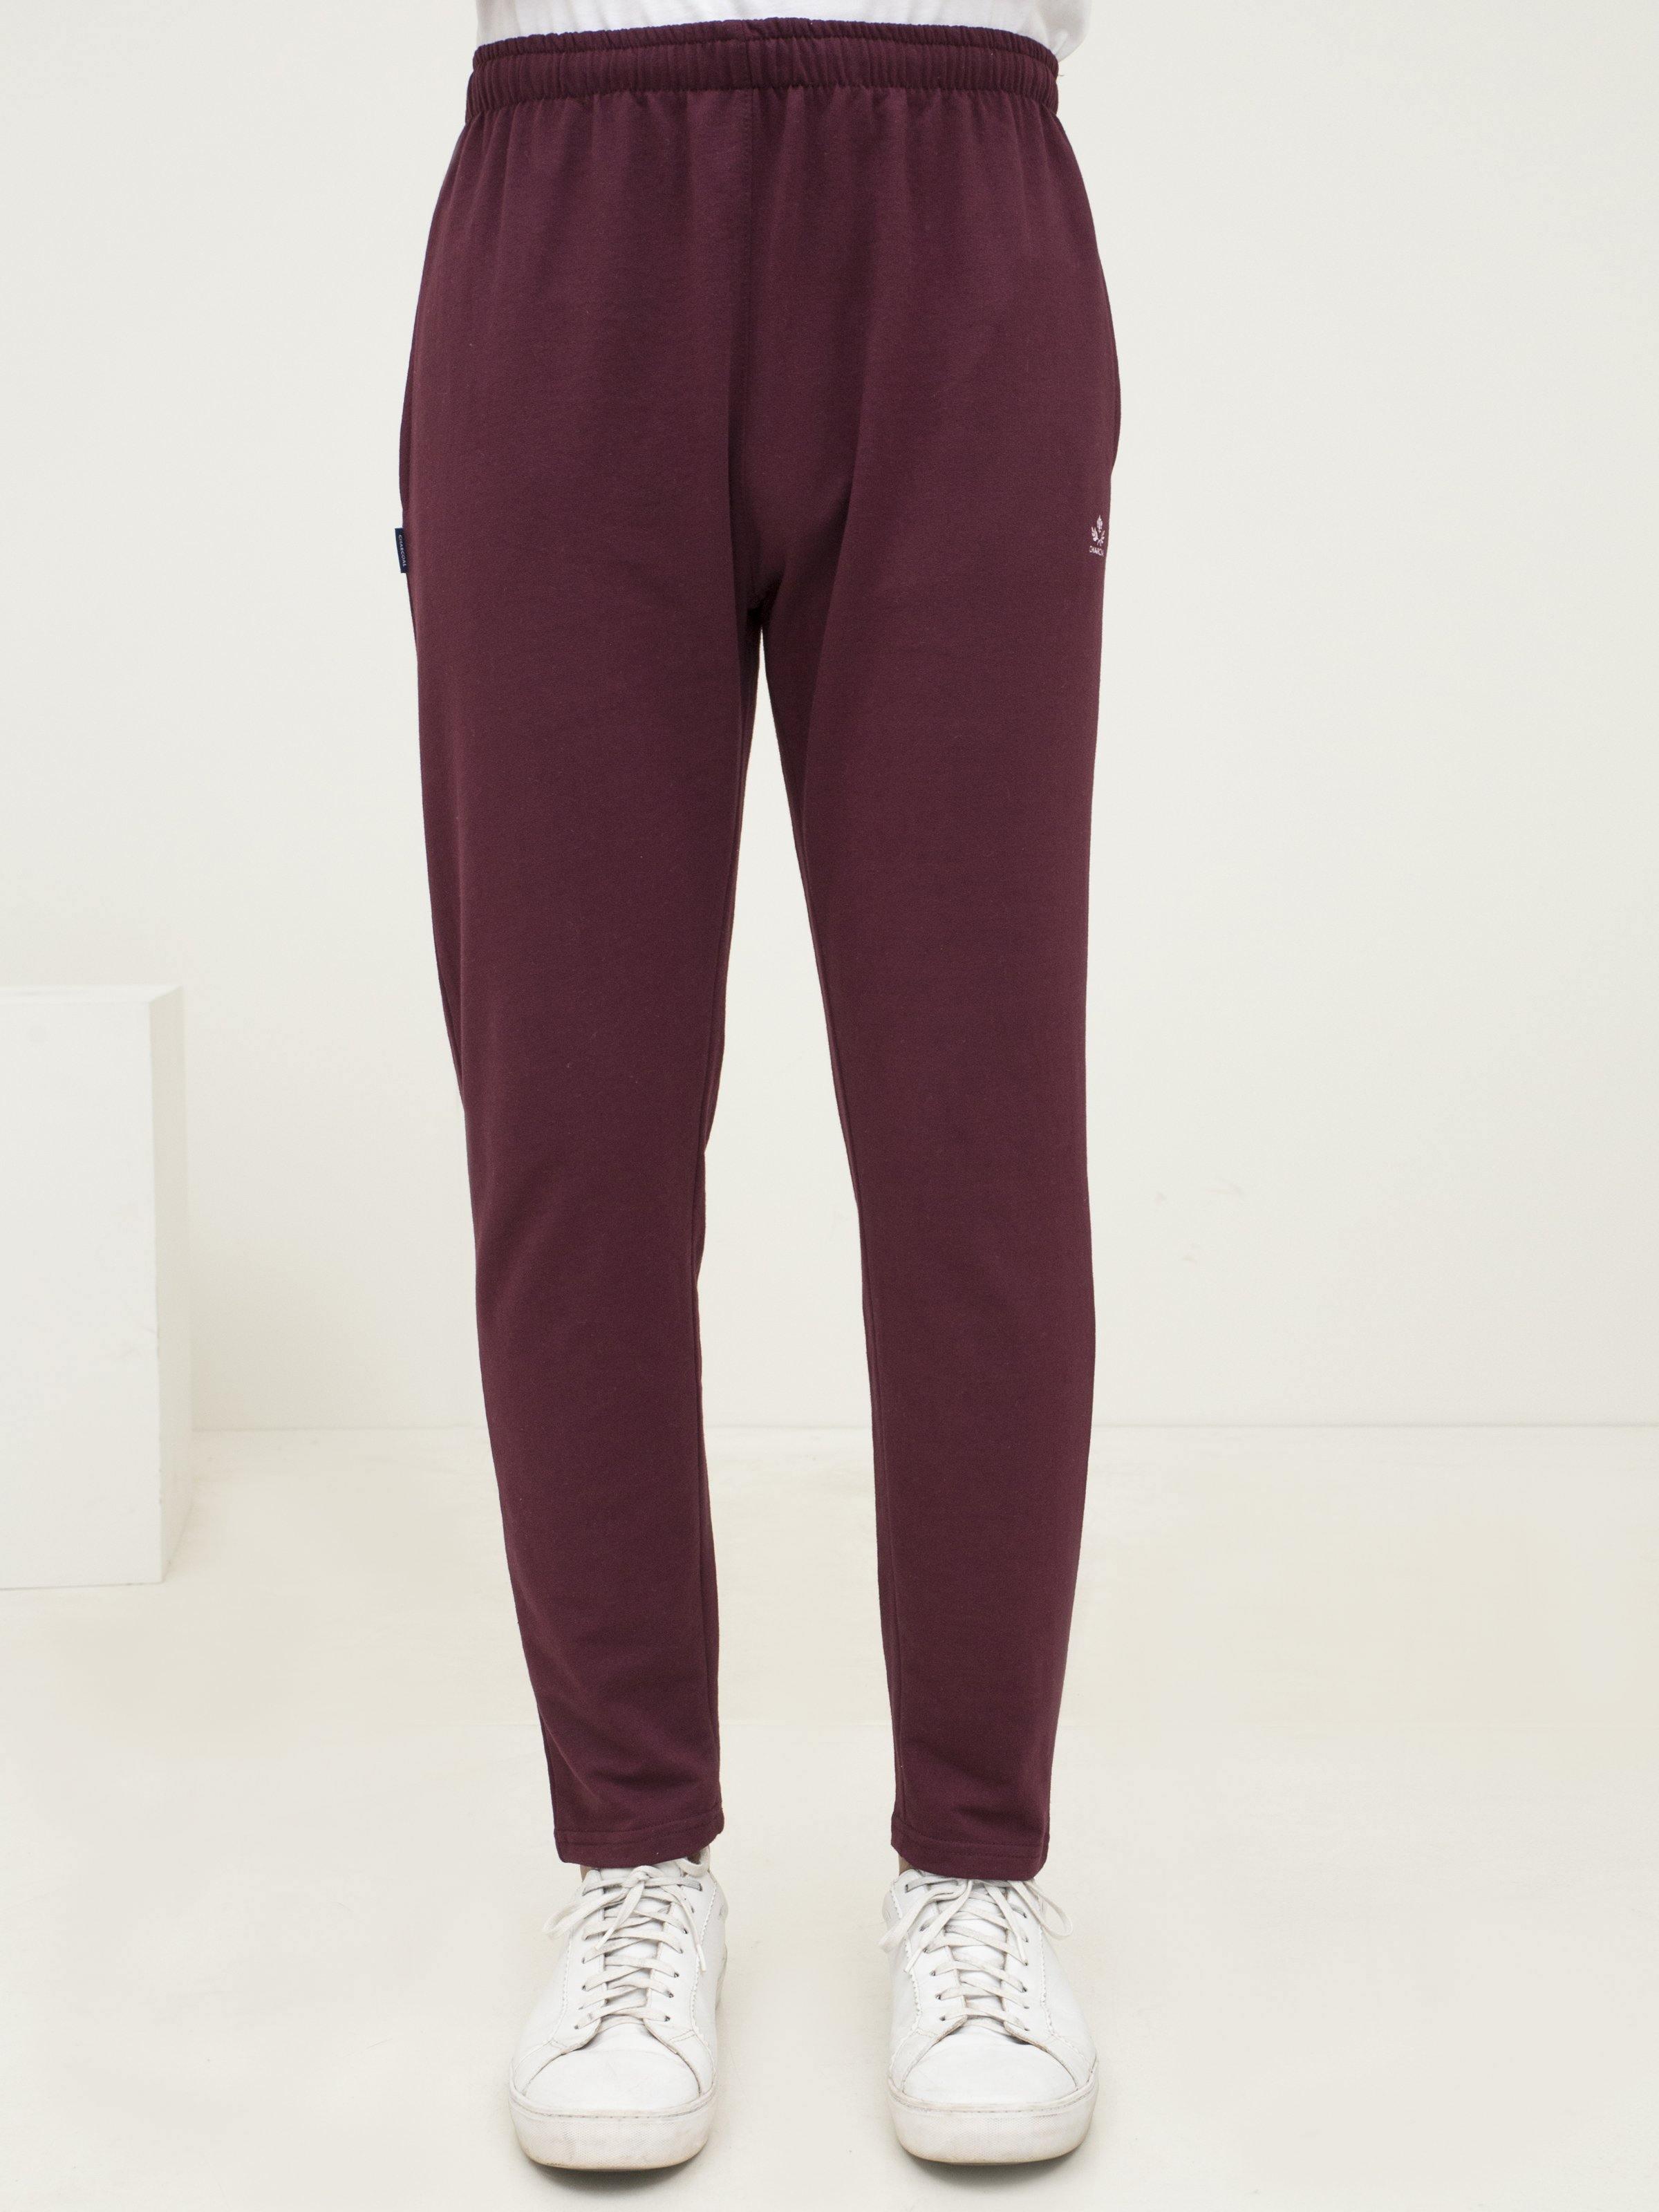 CASUAL TROUSER KNITTED SLEEPWEAR MAROON MELANGE at Charcoal Clothing